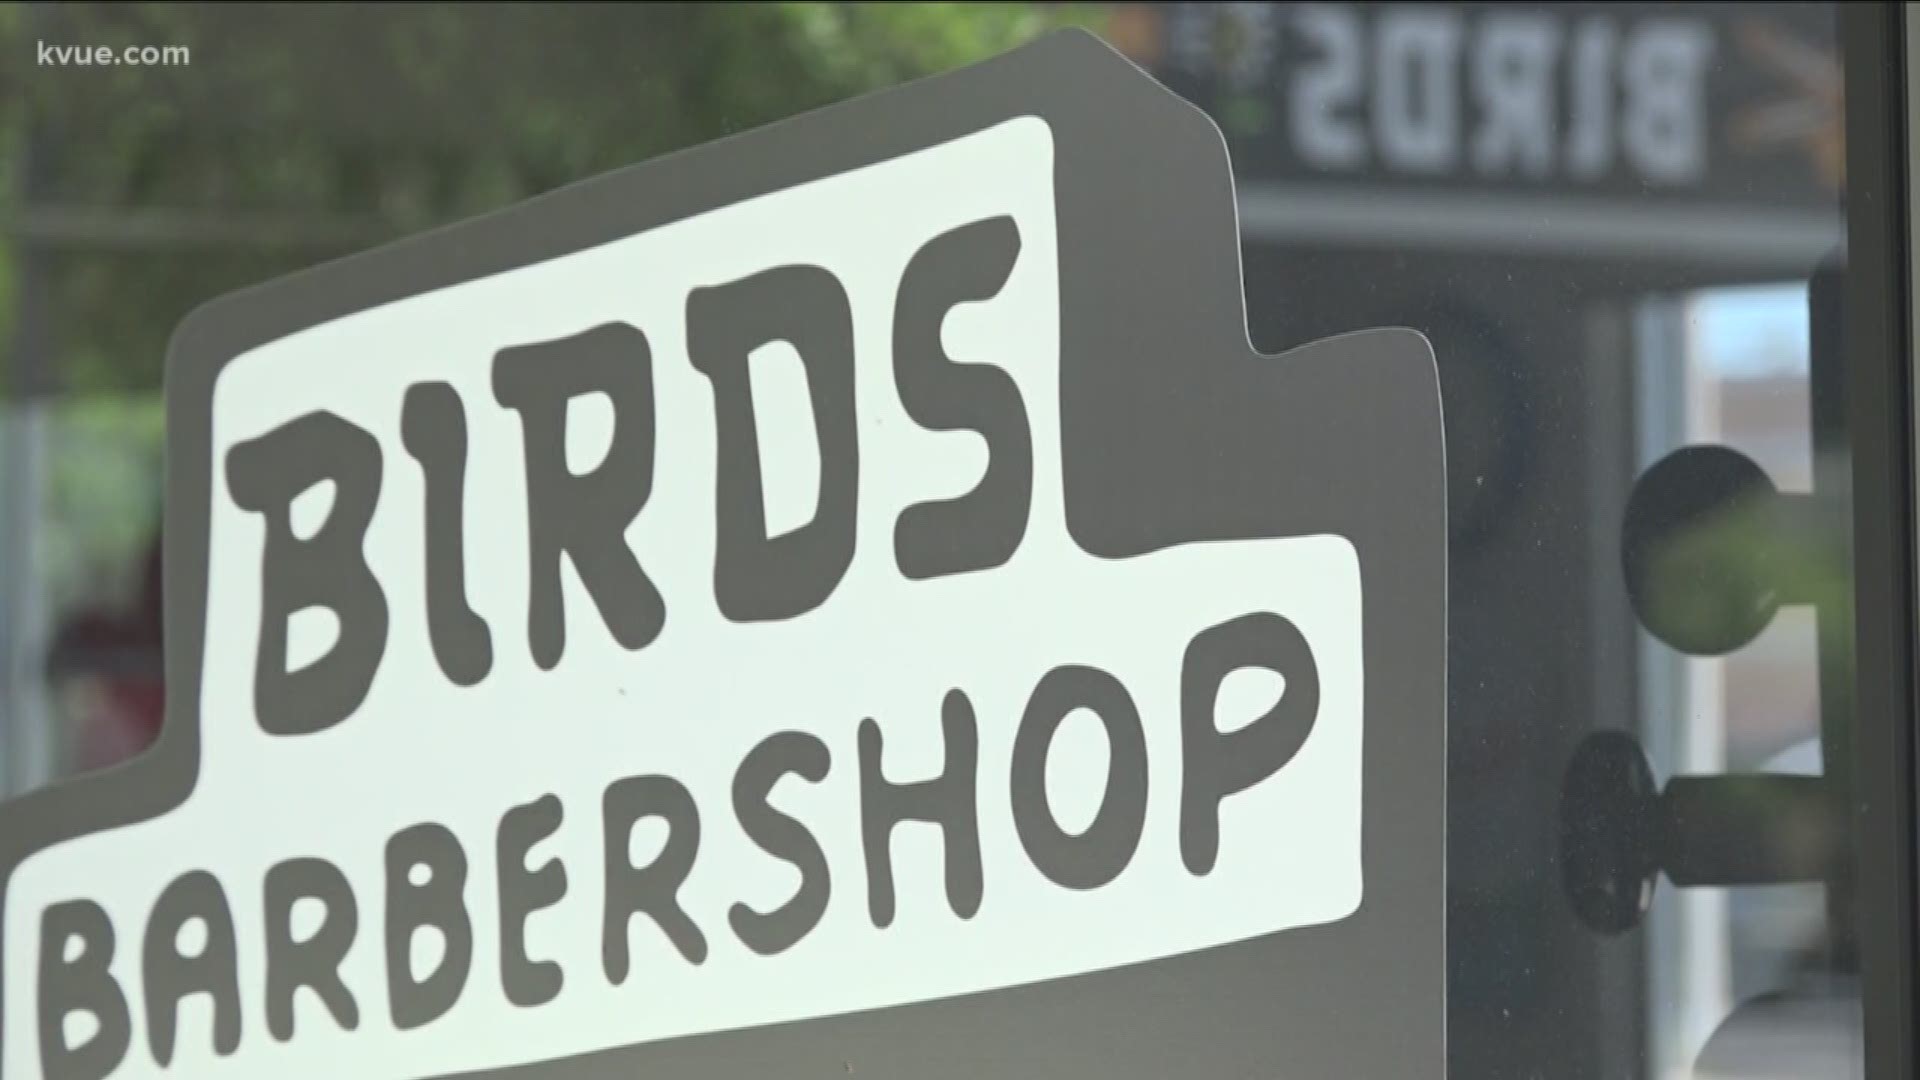 Shops like Birds Barbershop are among those who are not quite ready to reopen, despite the OK from Texas Governor Greg Abbott.